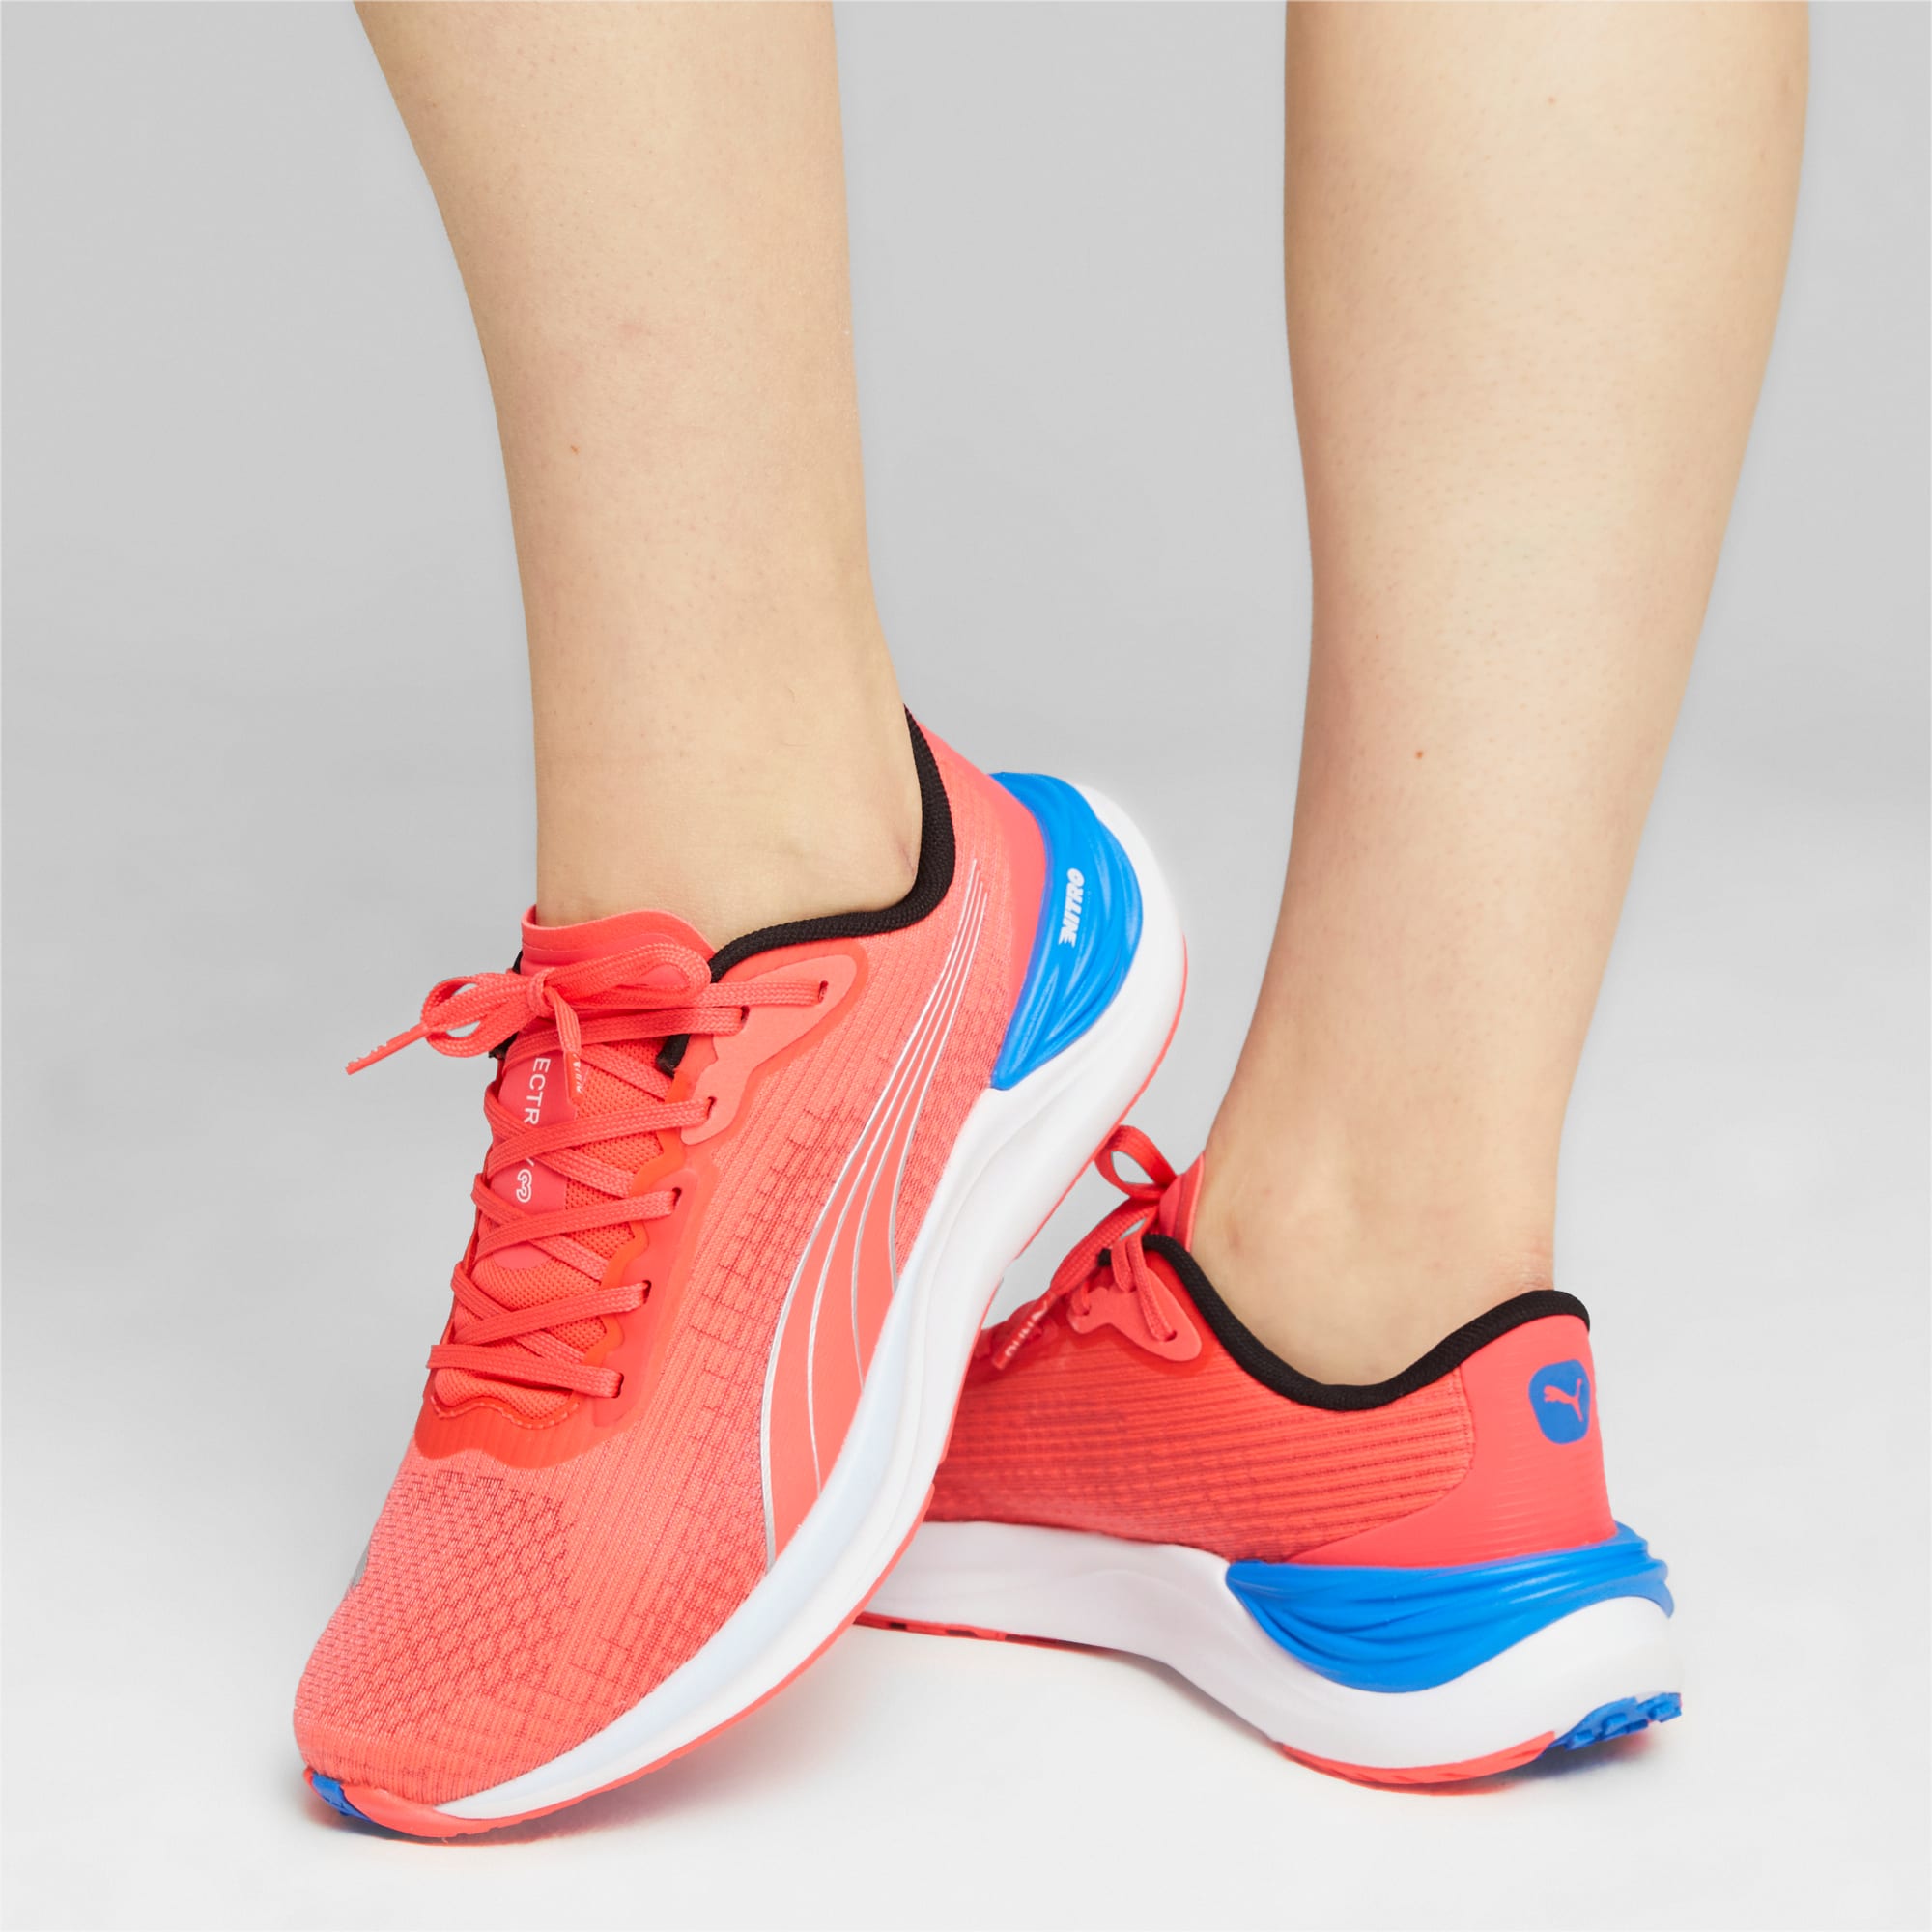 PUMA Electrify Nitro™ 3 Women's Running Shoes, Fire Orchid/Ultra Blue, Size 35,5, Shoes